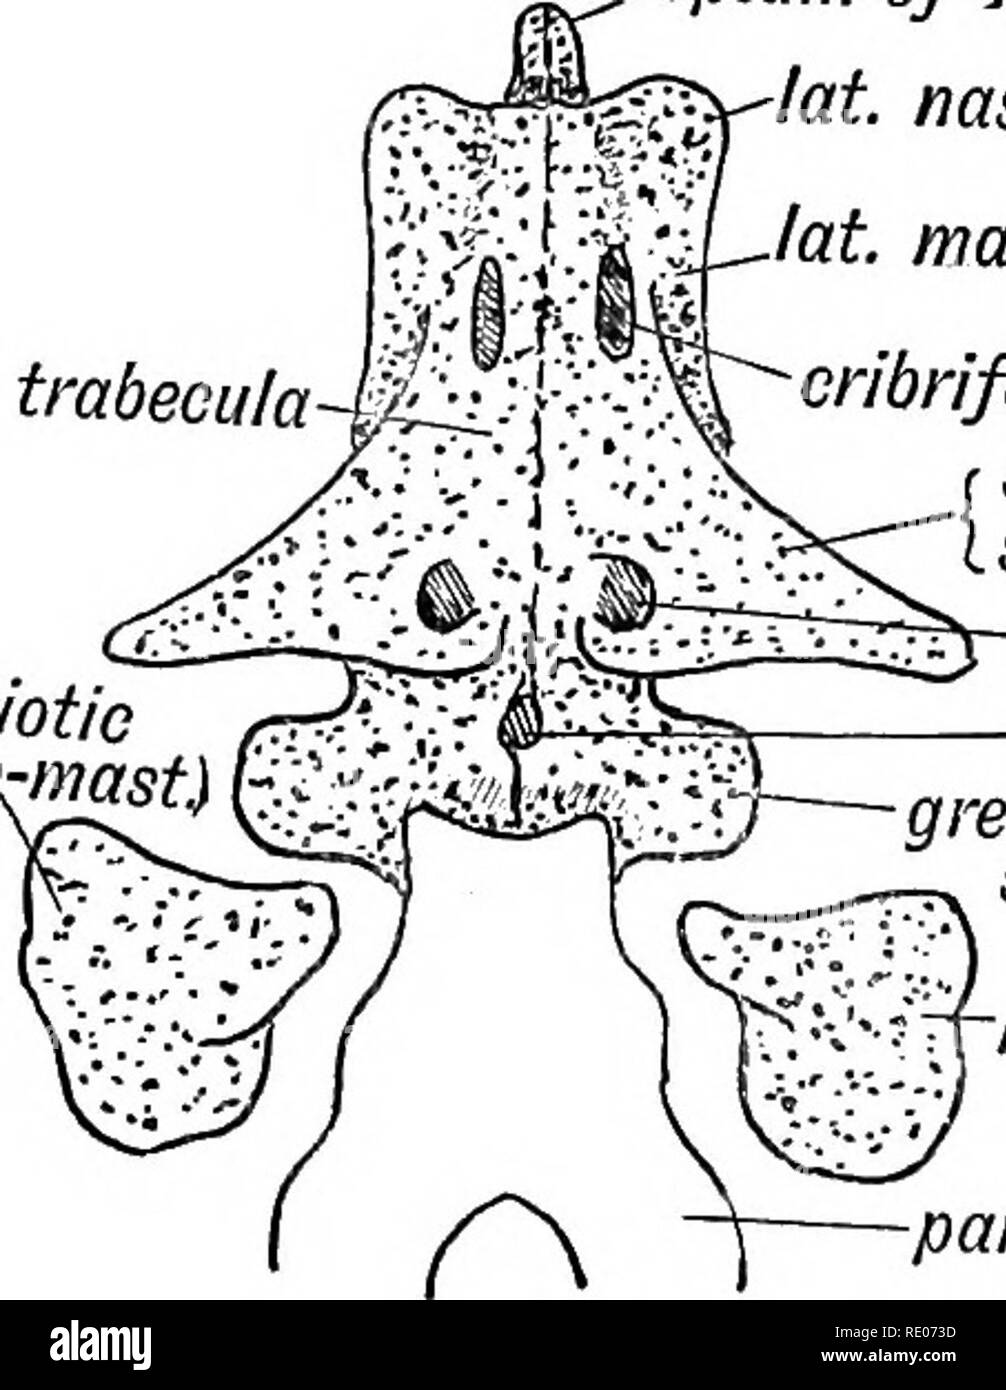 . Human embryology and morphology. Embryology, Human; Morphology. periotio ^â ^Apetro-mast.) parach. cart. notoch. Fin. 135.âDiagram of the Trabeculae Cranii, Parachordal Cartilages, and Periotio Capsules. septum of nose lat. nas. cart. lat. mass, ethmoid cribriform pi. r small wing isphen. optic, for. pituitary trabecula. Periotio (petro-mast) great wing sphen. petro-mast. -parach. cartil. Fig. 136.â Diagram of the structures formed from the Trabeculae Cranii. membranous basis of the embryonic brain capsule in front of the notochord and on each side of the pituitary body. In Fig. 136 is shown Stock Photo